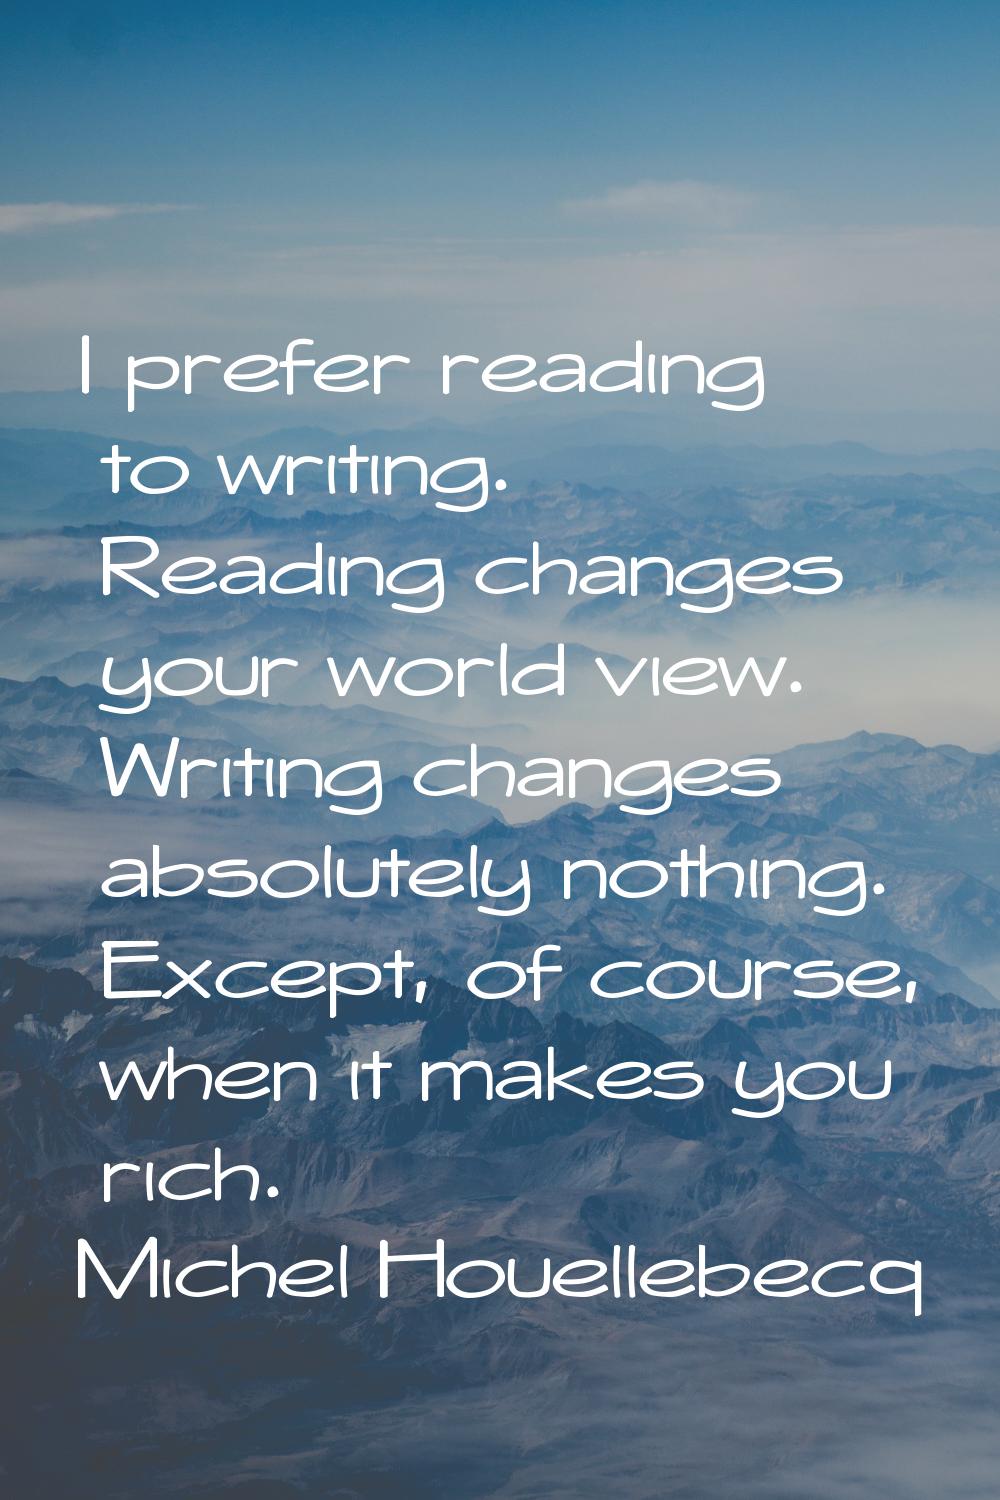 I prefer reading to writing. Reading changes your world view. Writing changes absolutely nothing. E